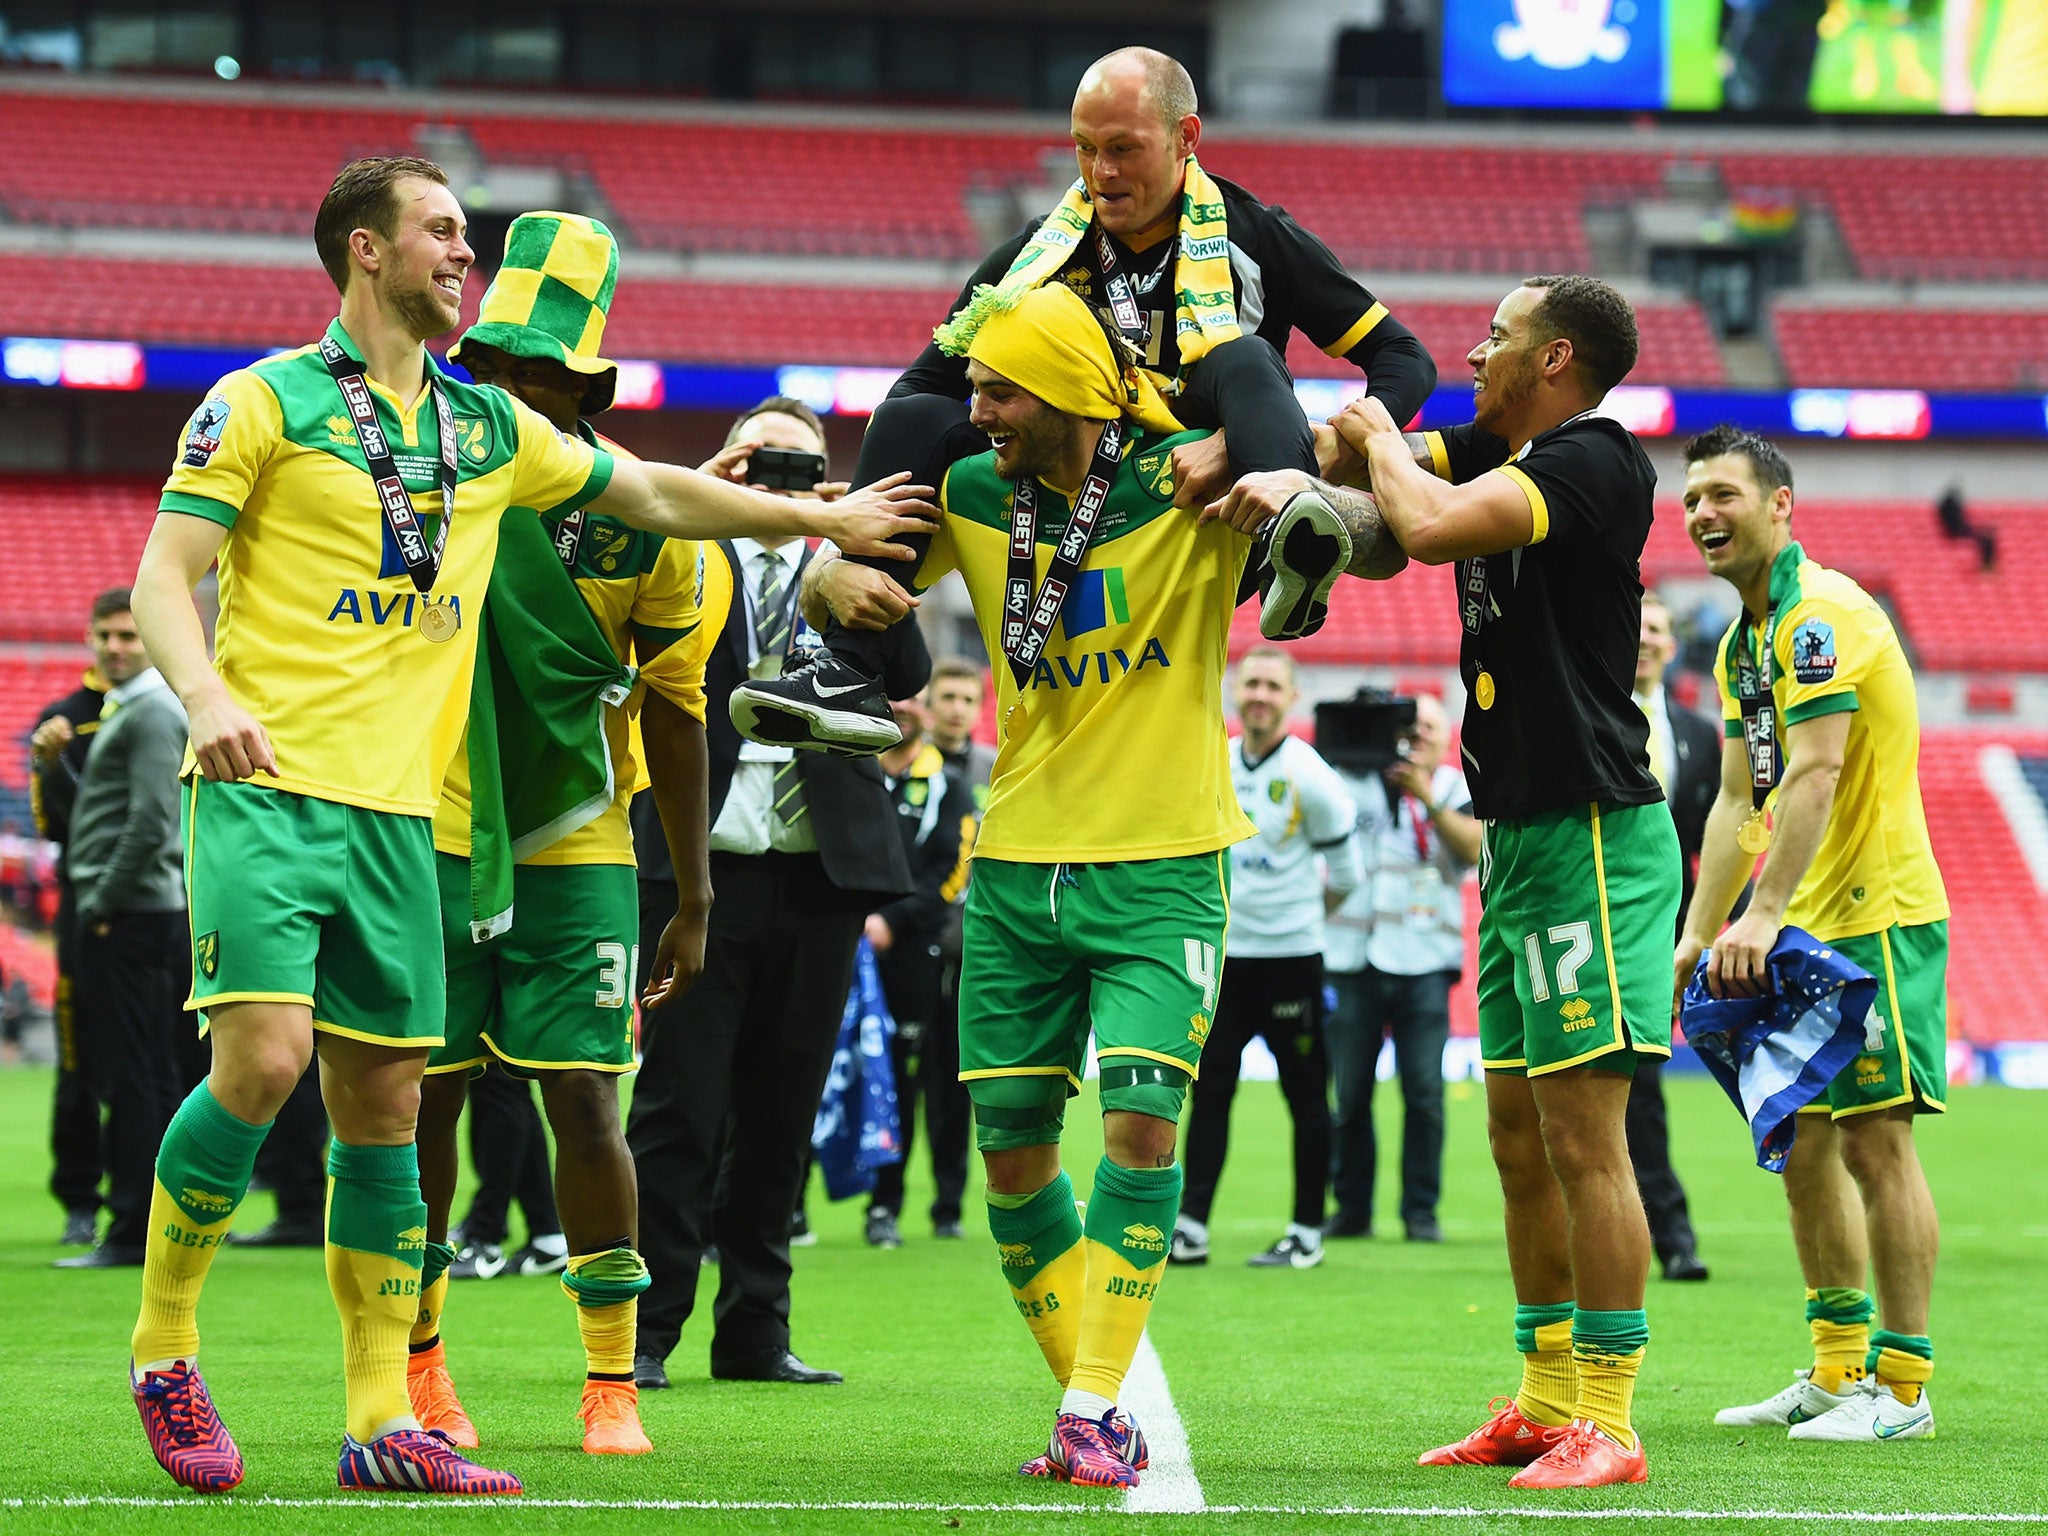 Manager Alex Neil is held aloft by his players after the match